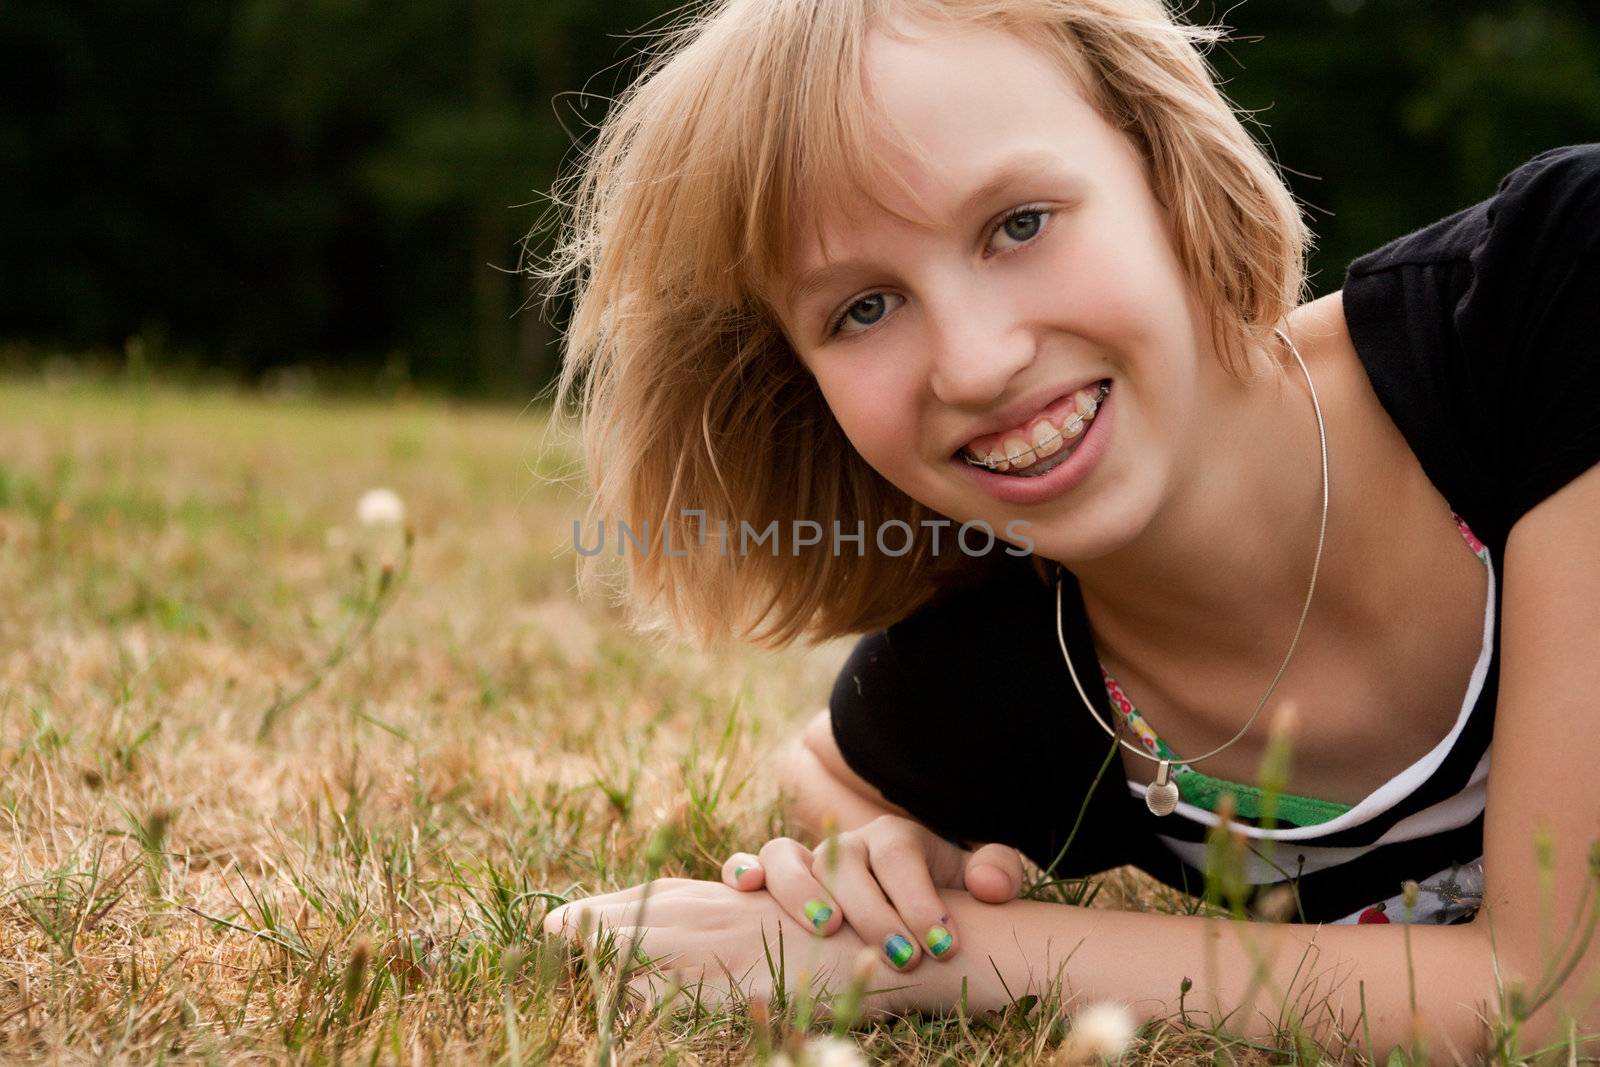 Young summer girl portrait in the grass